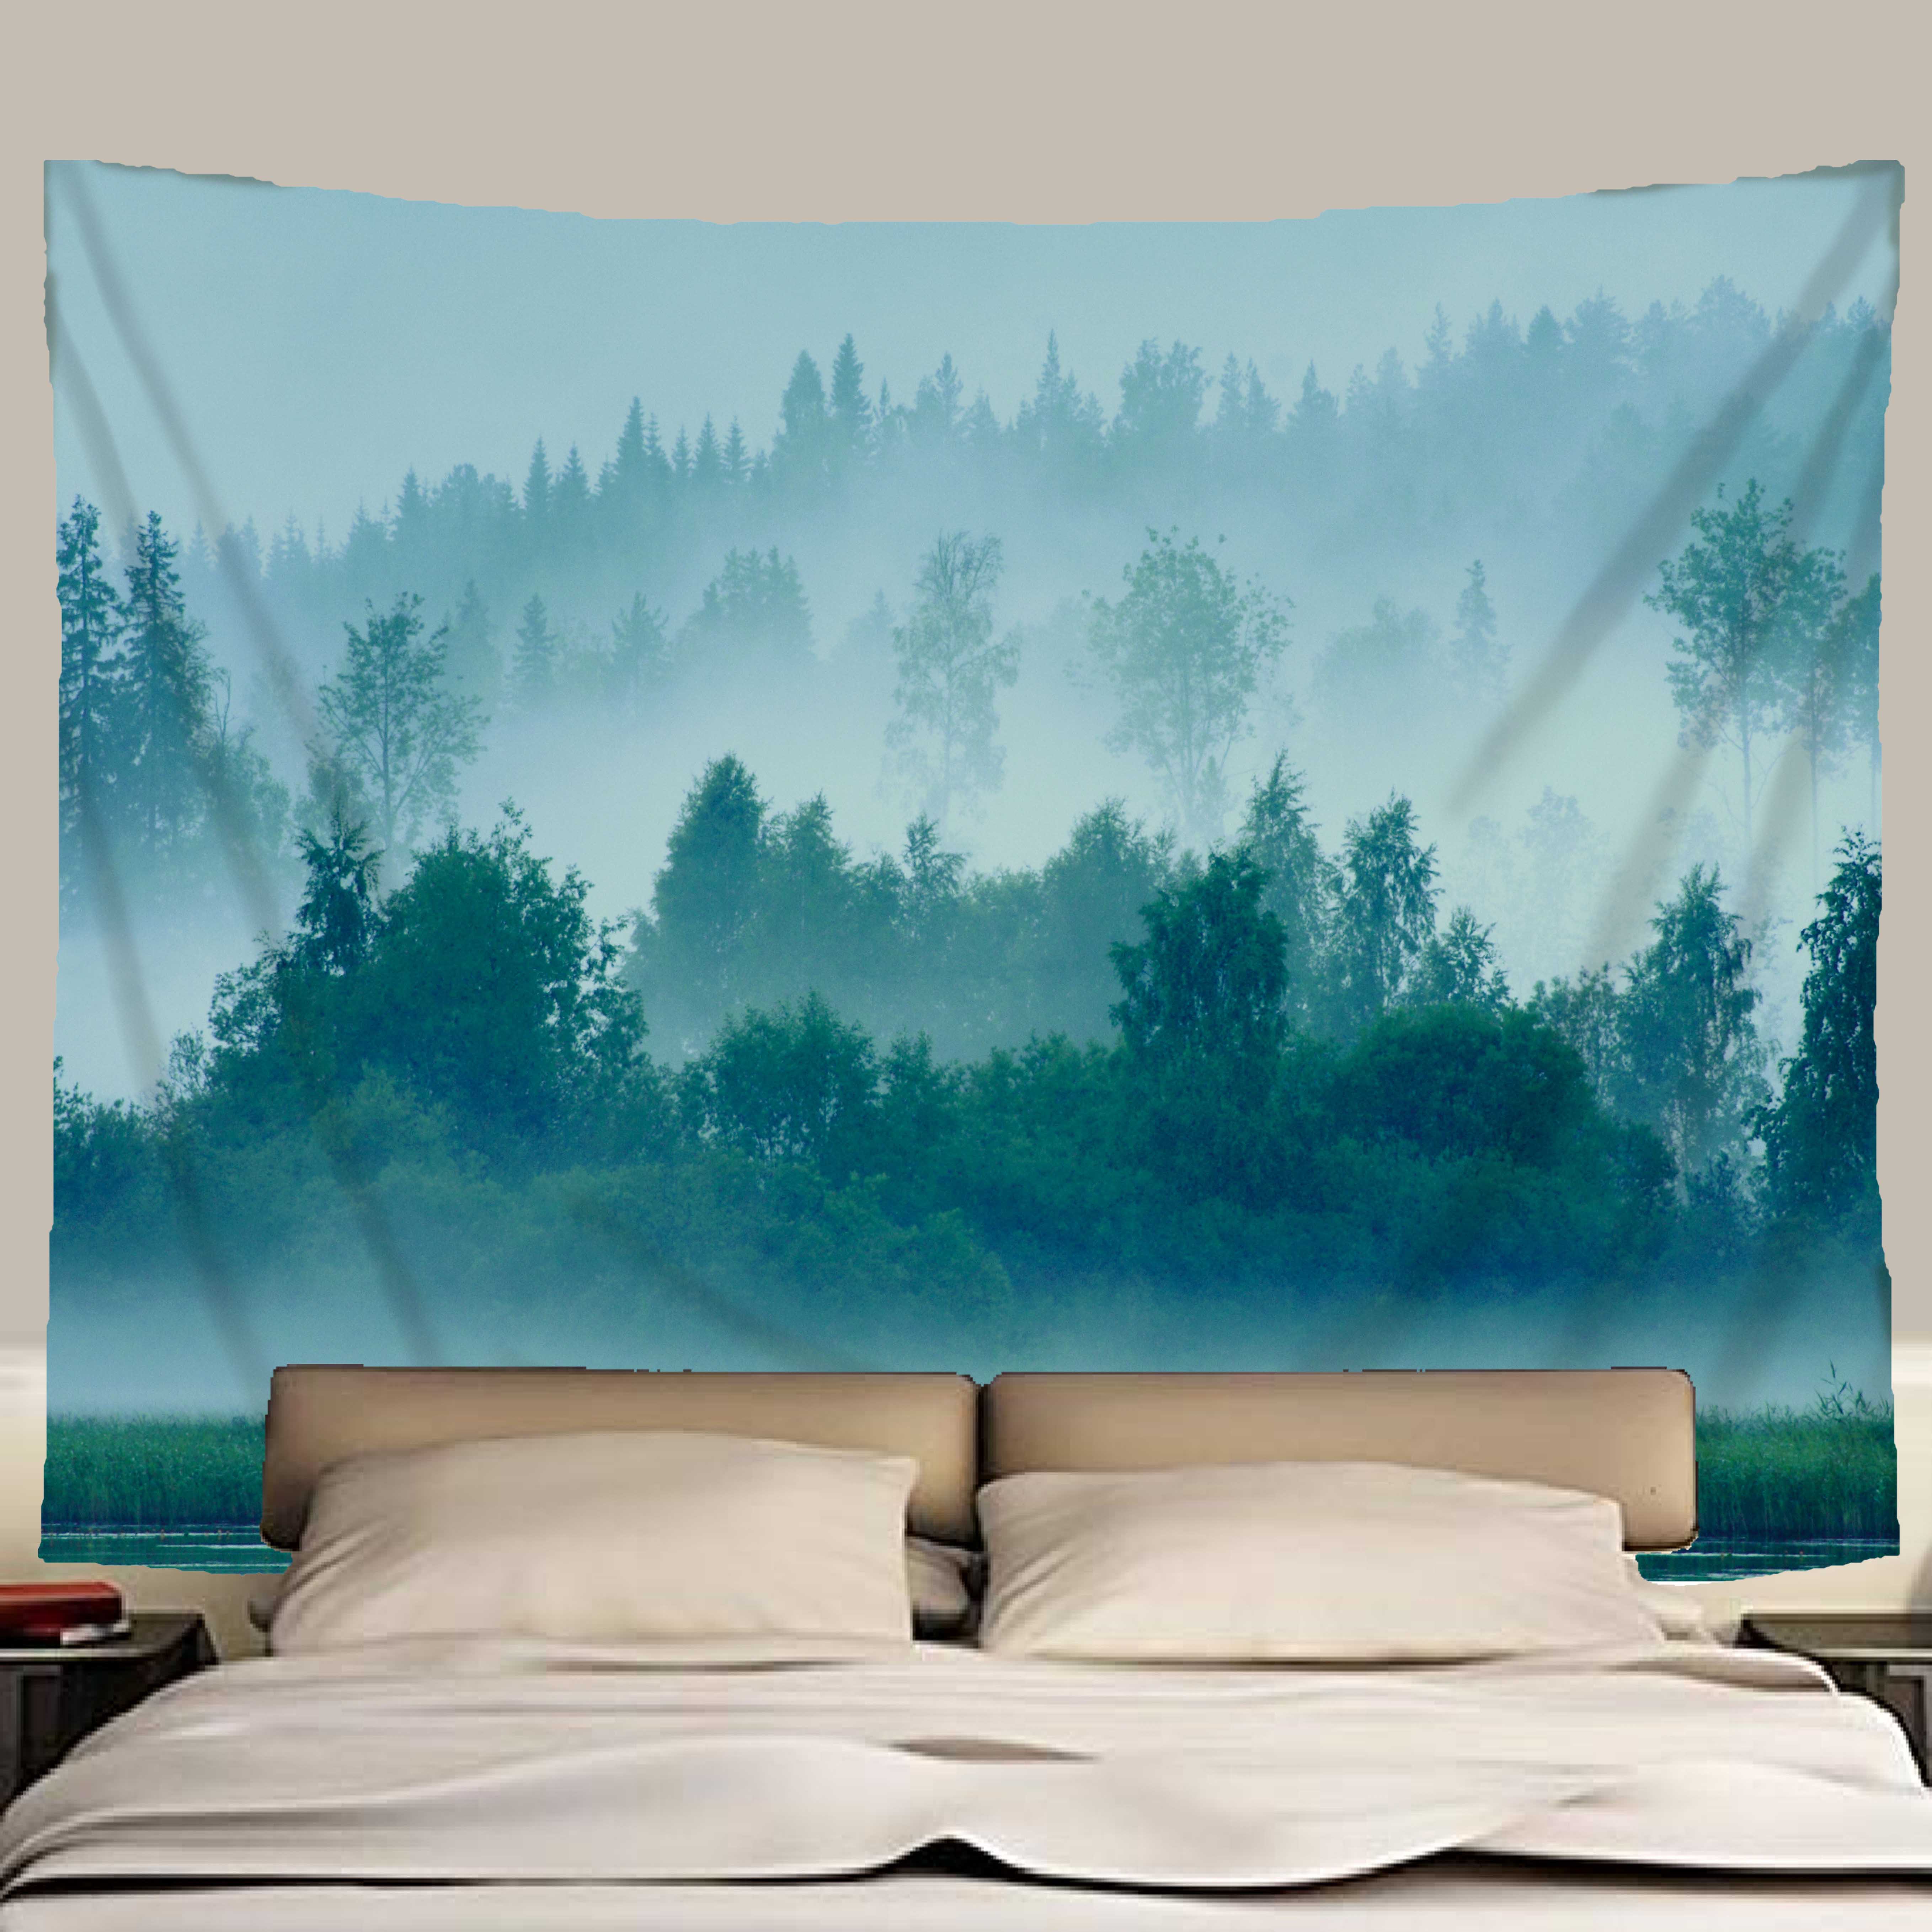 Forest Mountain In Fog Scenery Tapestry Wall Hanging Home Decoration For Living Room Bedroom Dorm Art Deck, Sold As 1 Panel